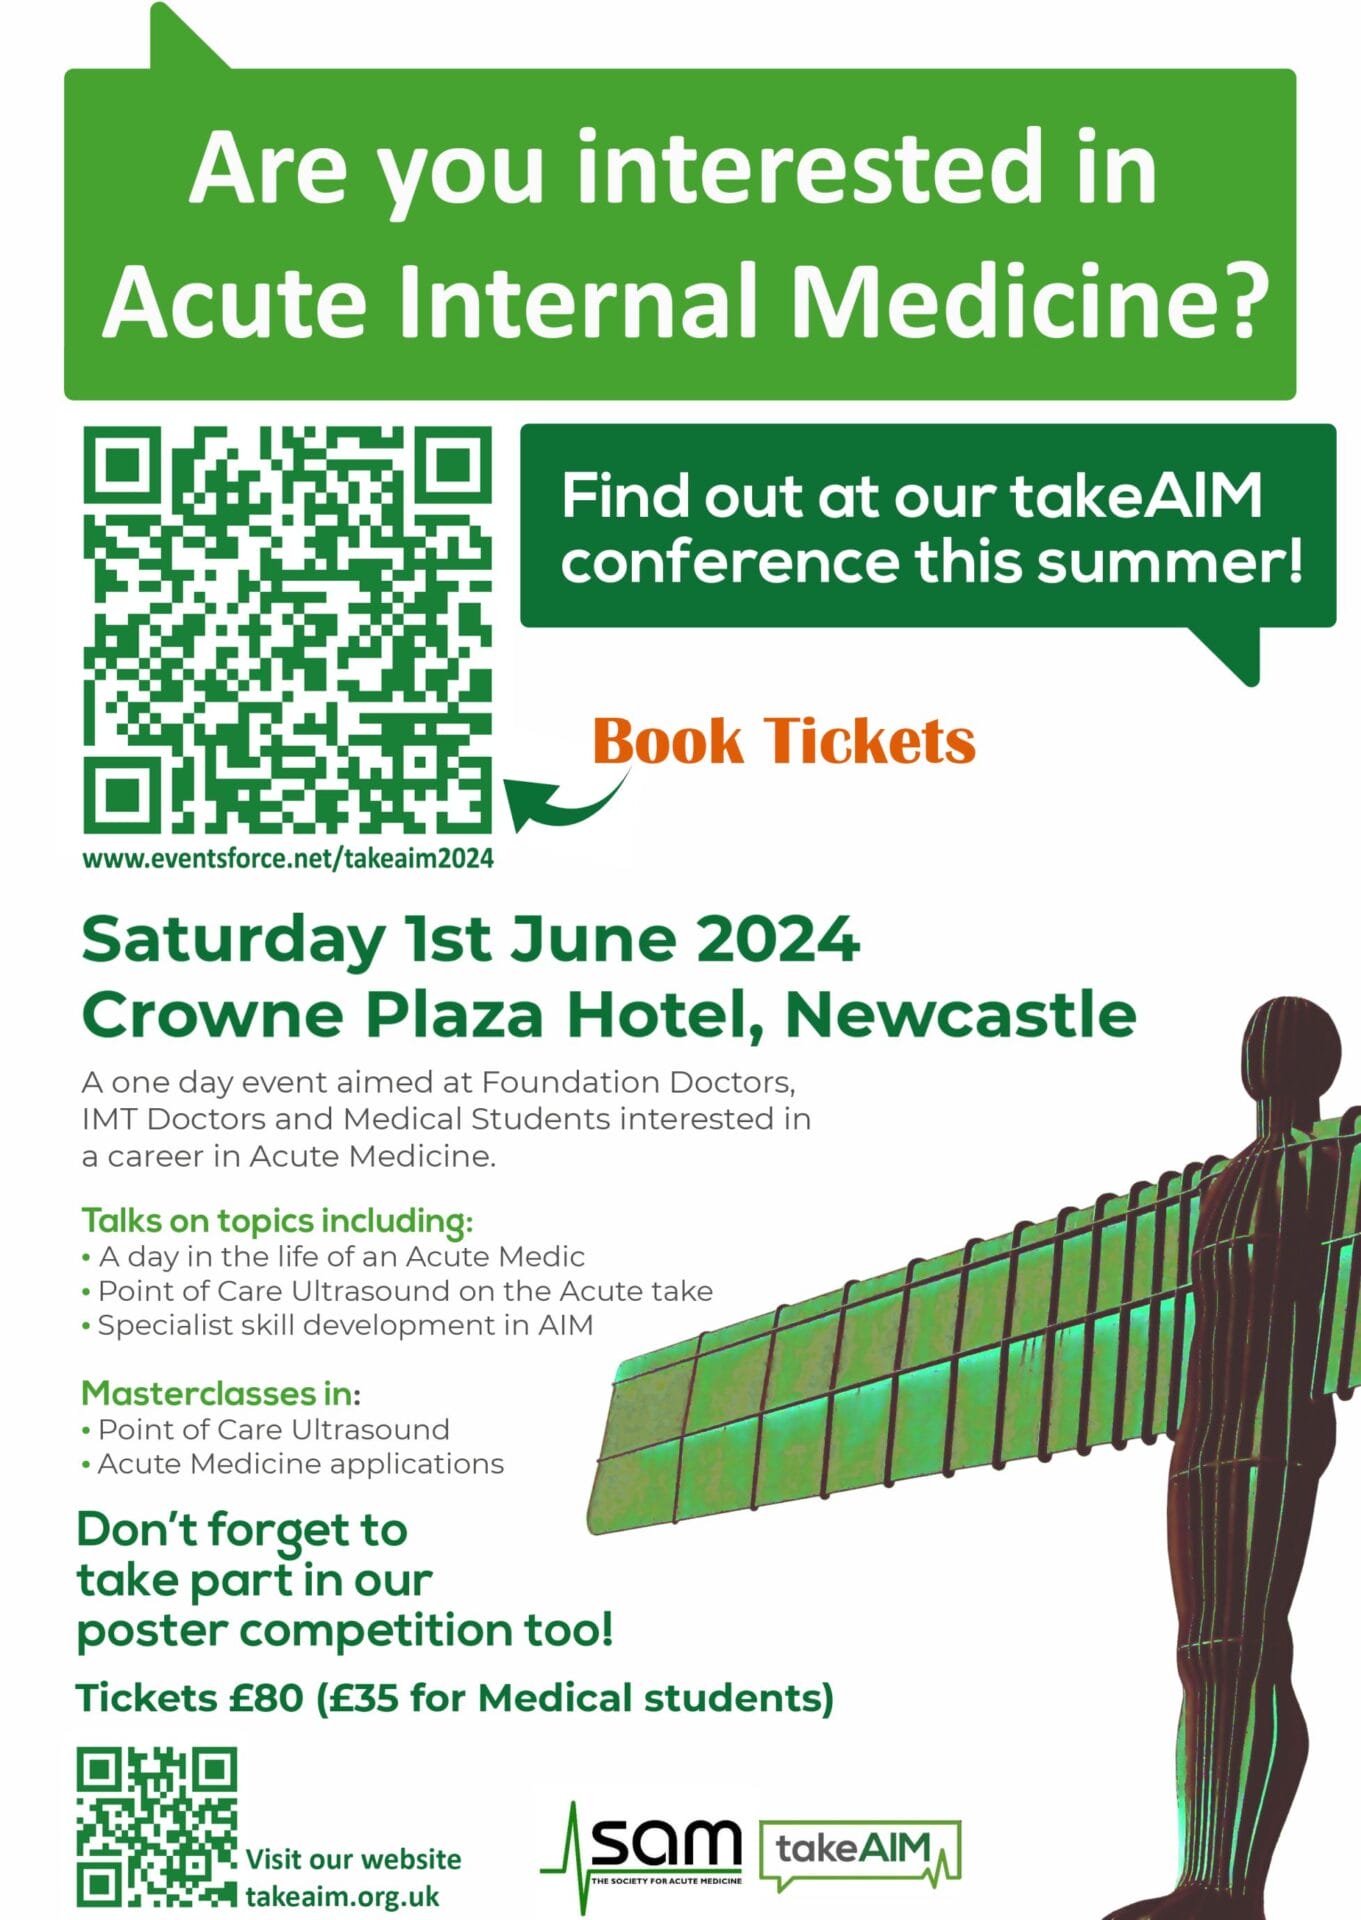 Newcastle_Poster_for printing with QR codes _green angel version_png version_small